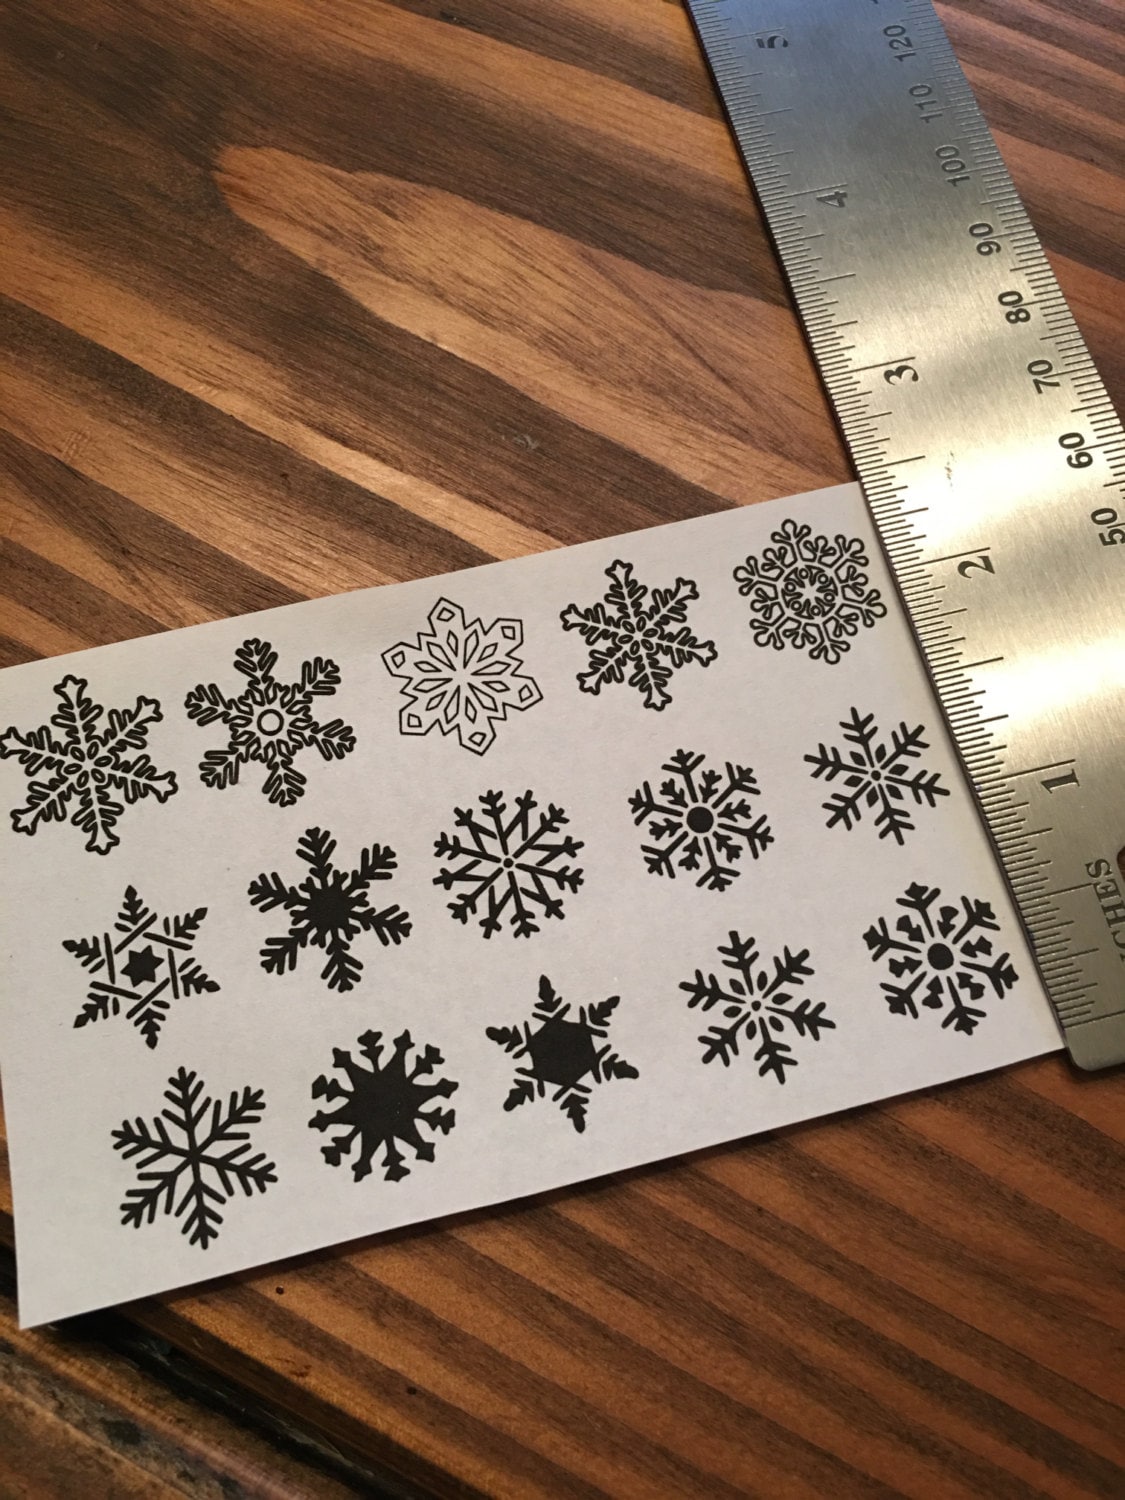 Snowflake Tattoo Designs and Meanings  TatRing